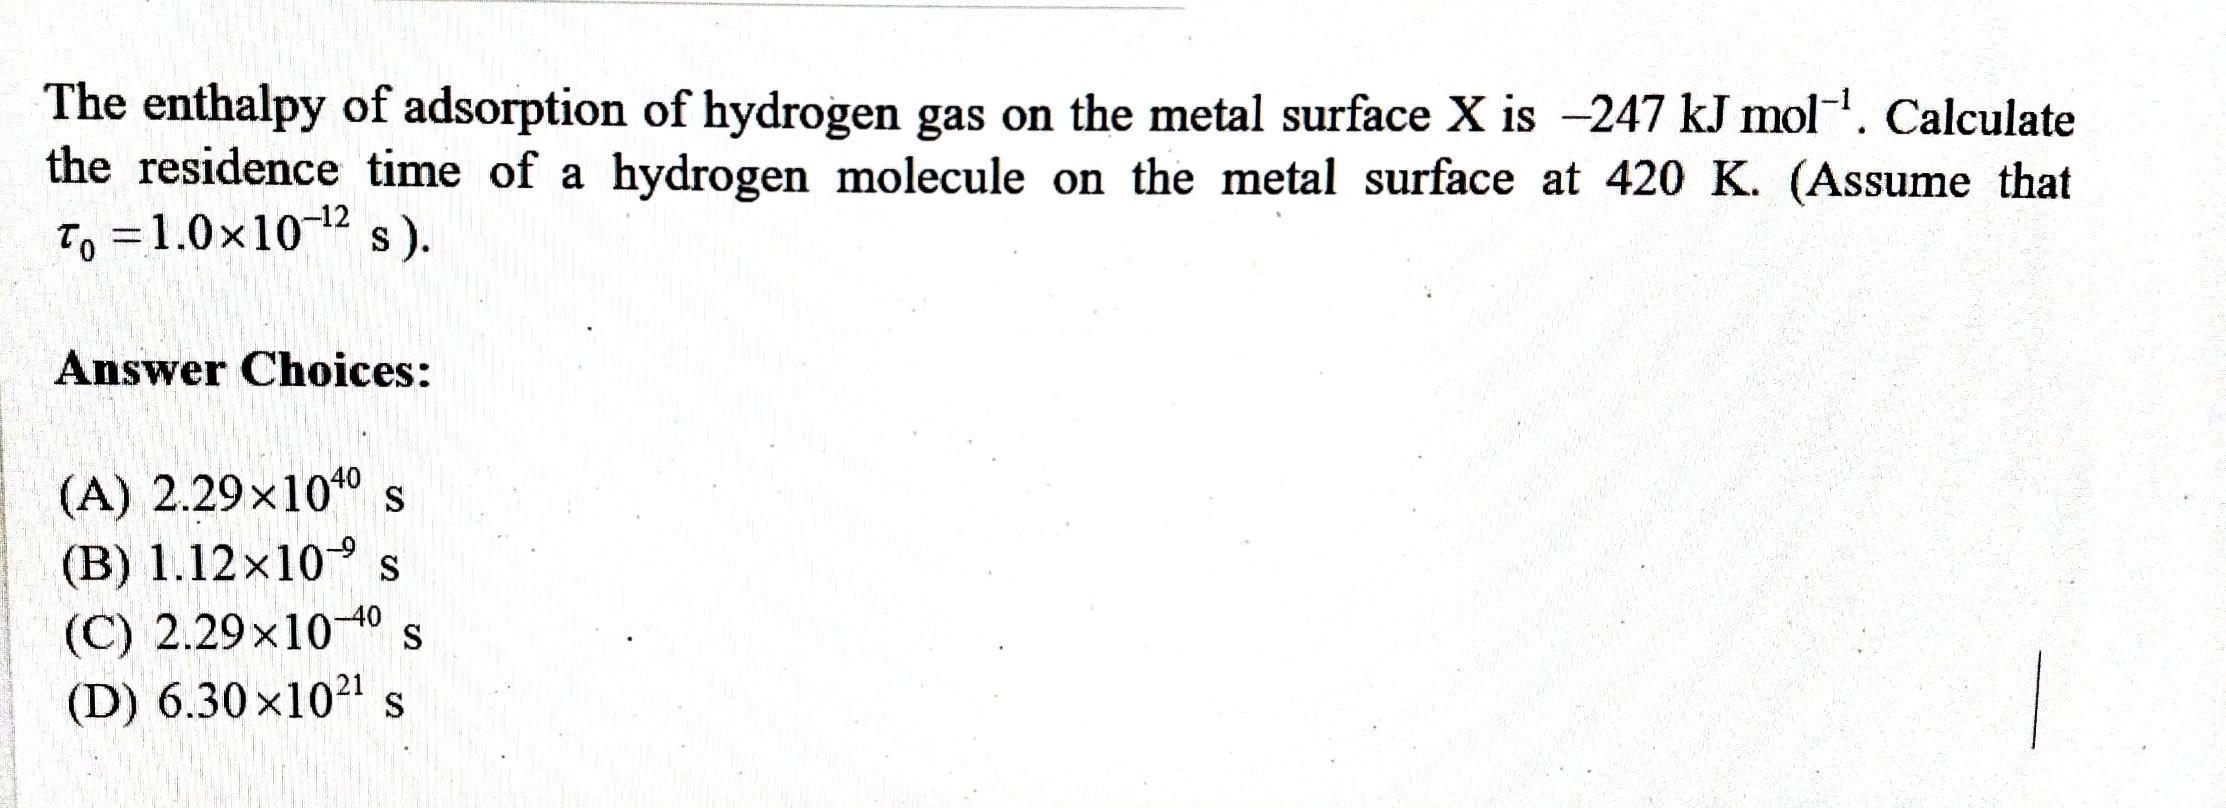 The enthalpy of adsorption of hydrogen gas on the metal surface ( X ) is ( -247 mathrm{~kJ} mathrm{~mol}^{-1} ). Calcul